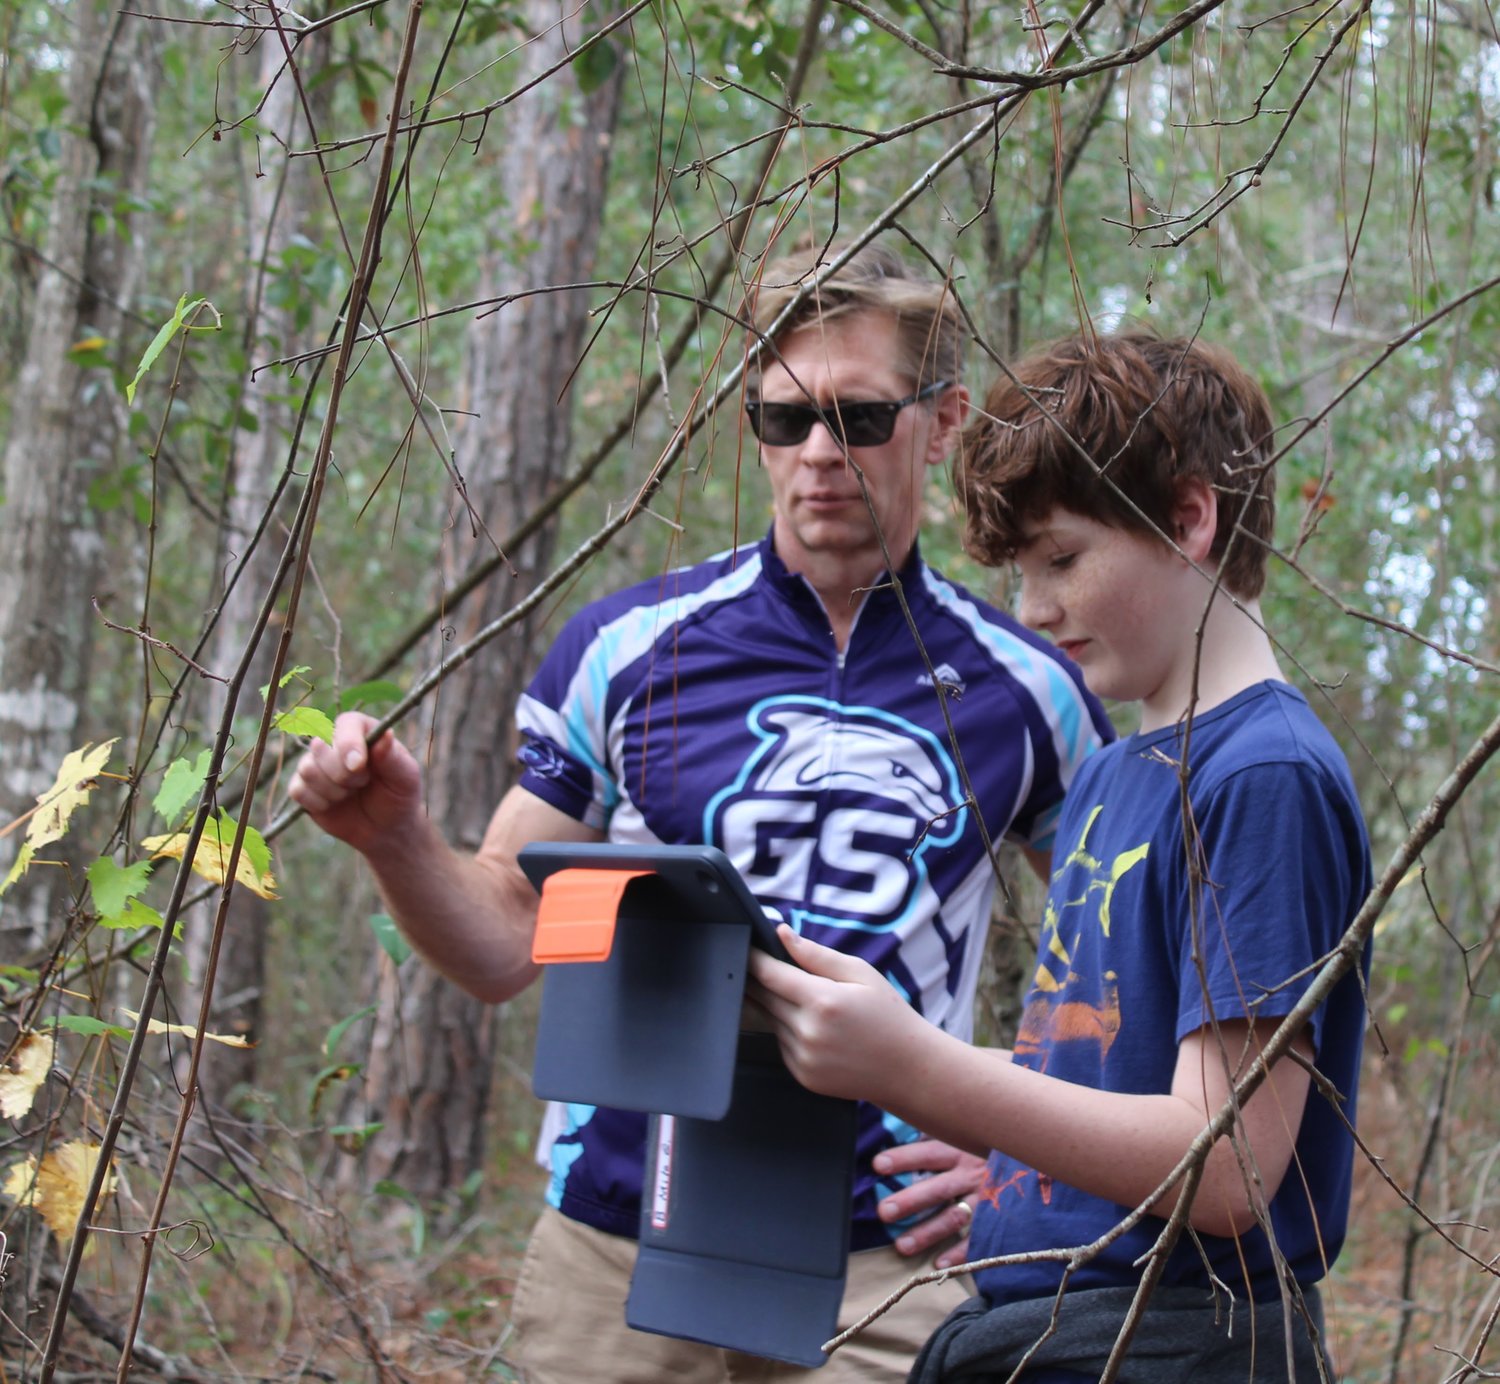 Alabama State Superintendent, Dr. Eric Mackey joined students in the wood to identify leaves.